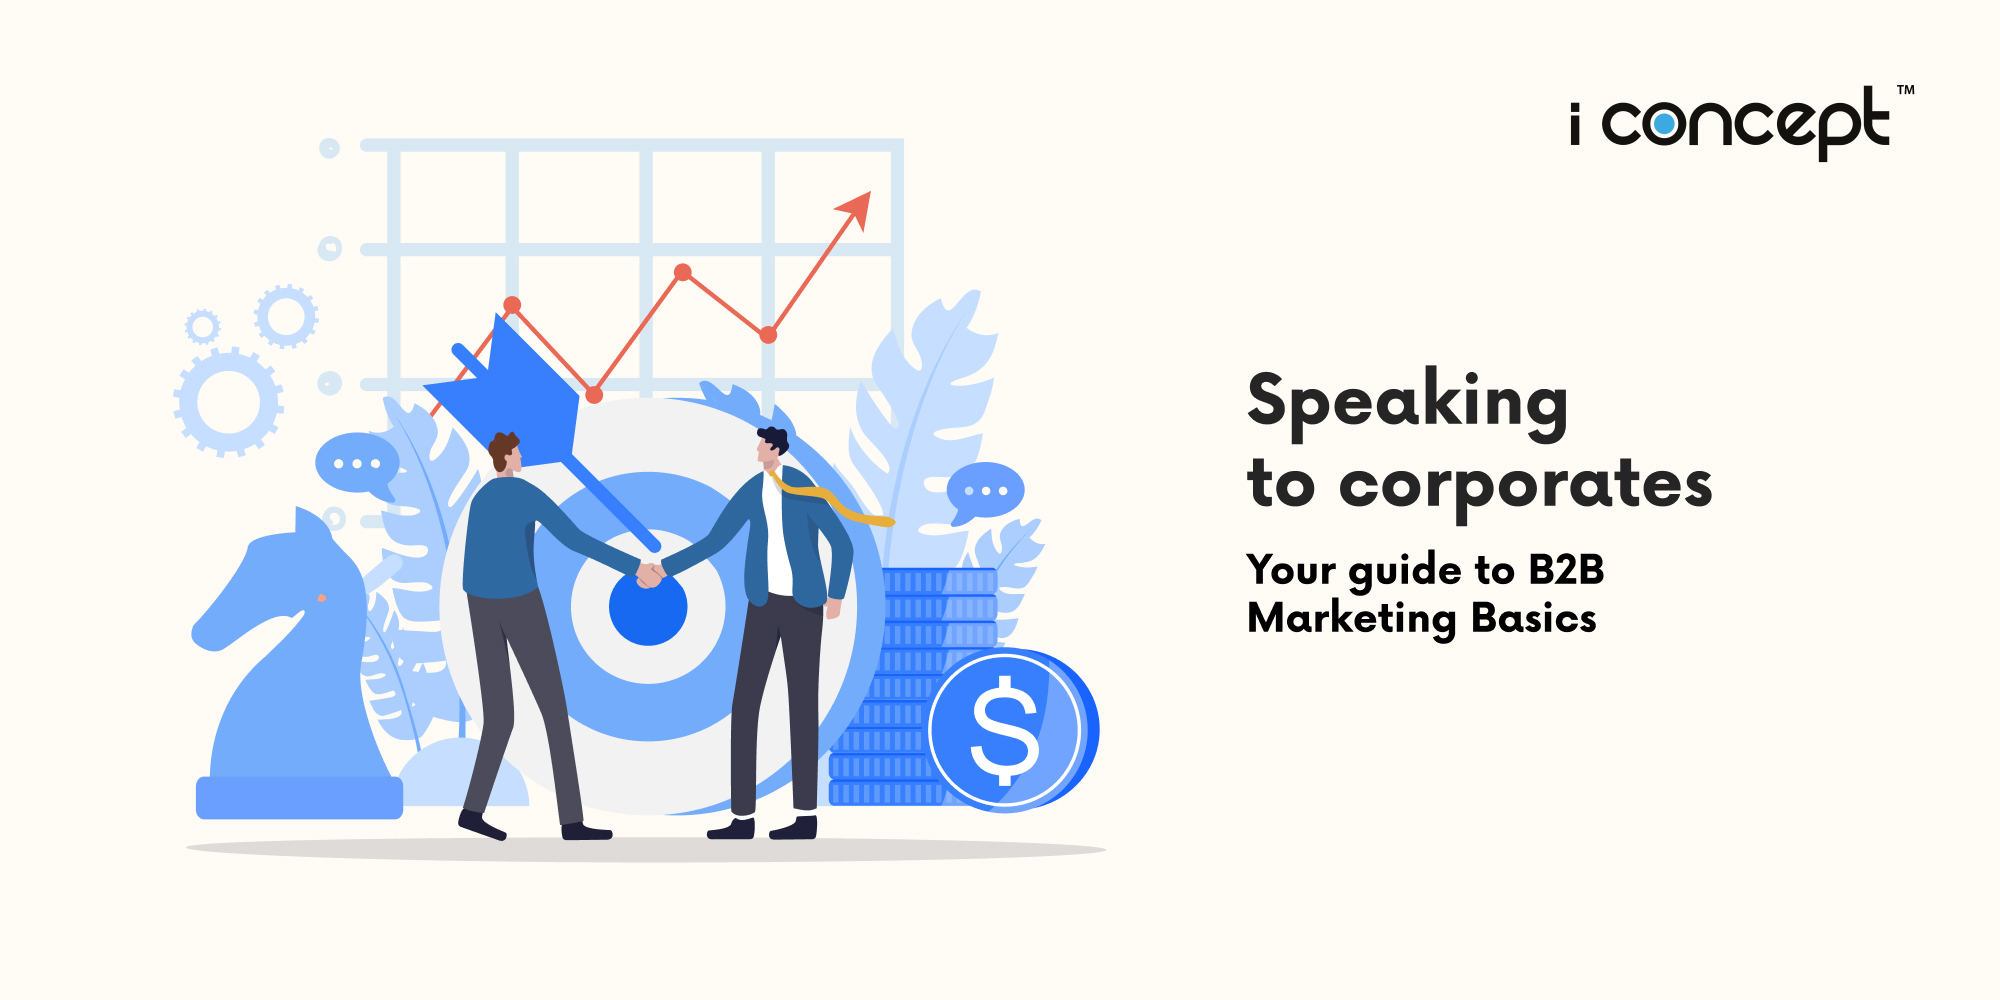 speaking-to-corporates-guide-to-b2b-business-marketing-basics